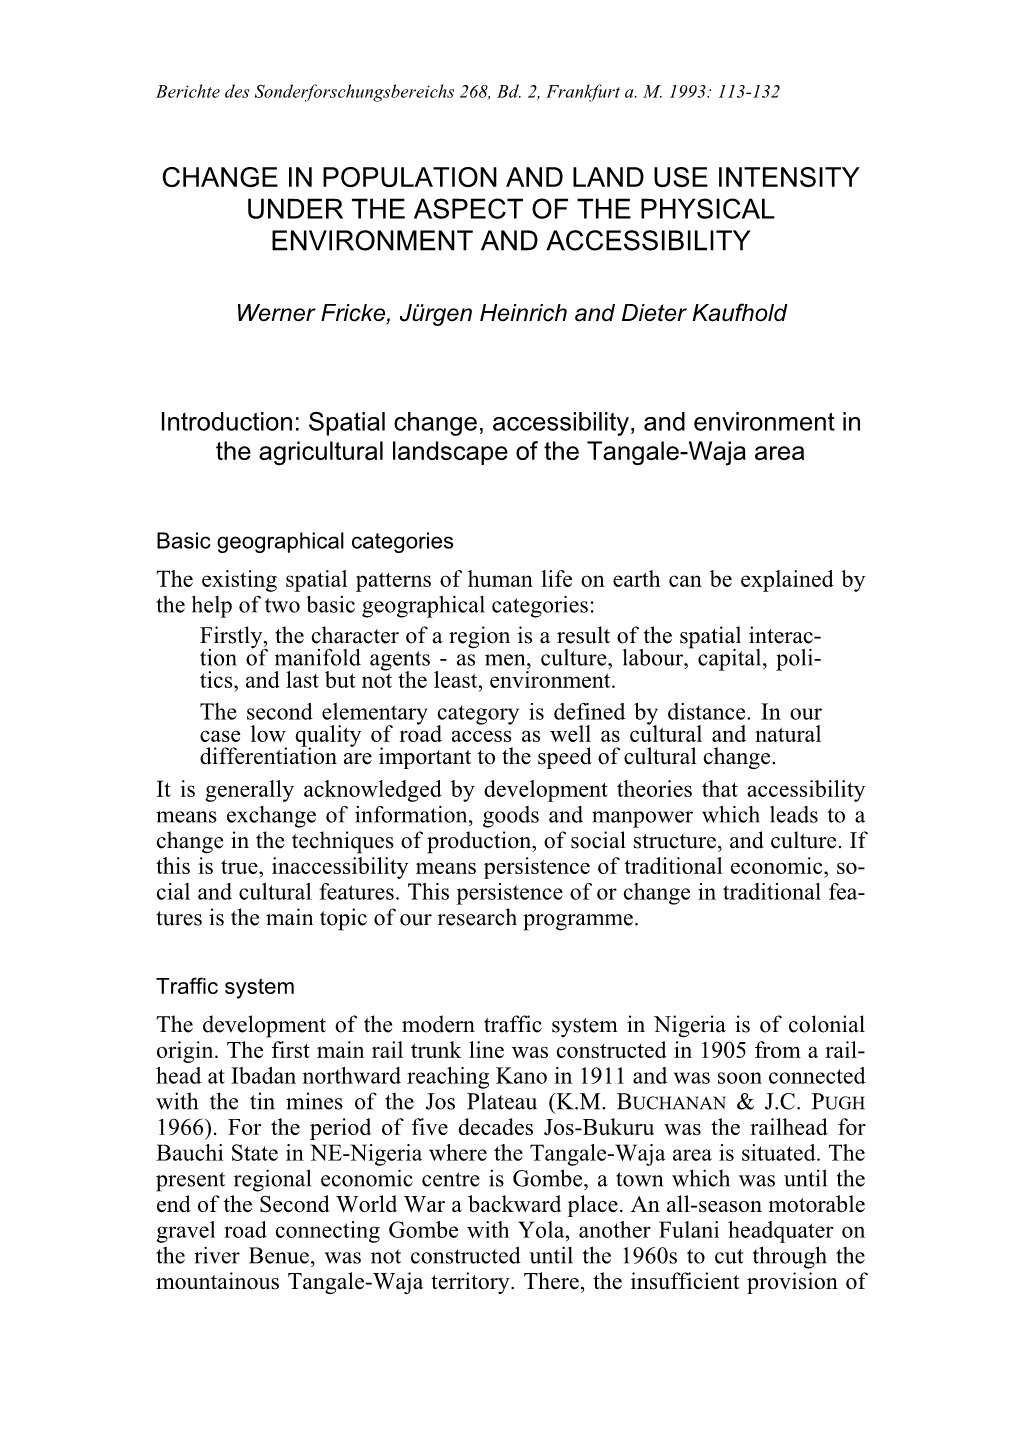 Change in Population and Land Use Intensity Under the Aspect of the Physical Environment and Accessibility